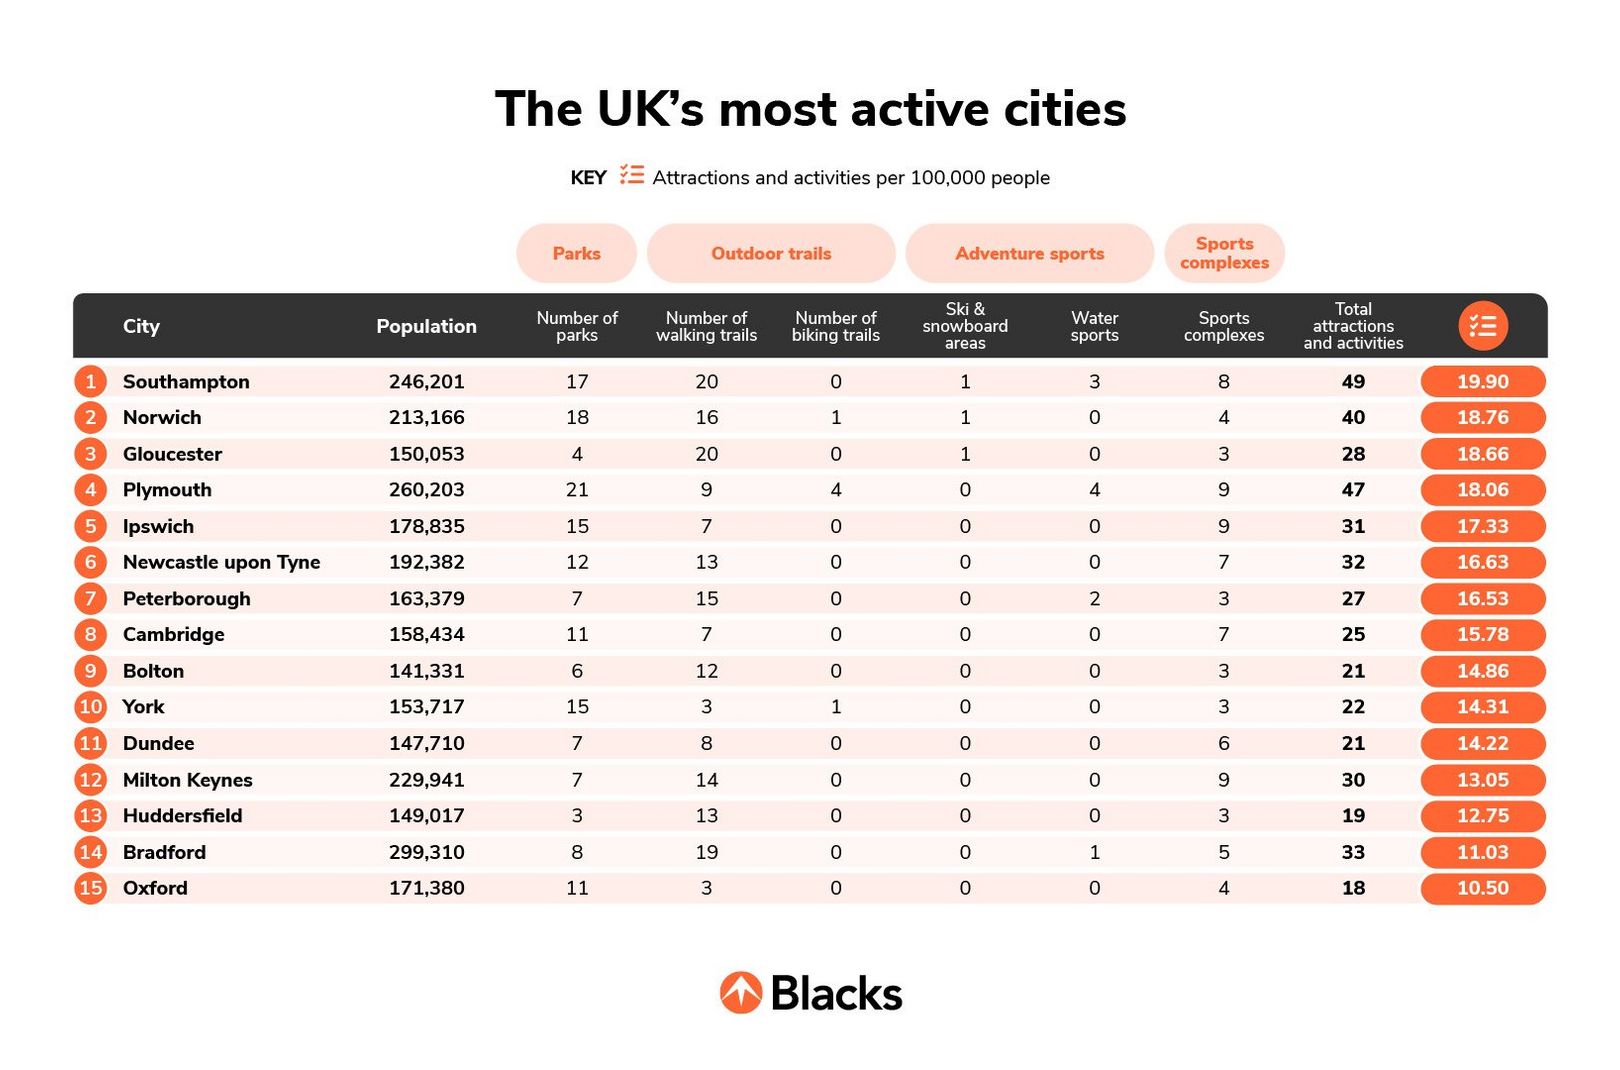 The UK’s most active cities table